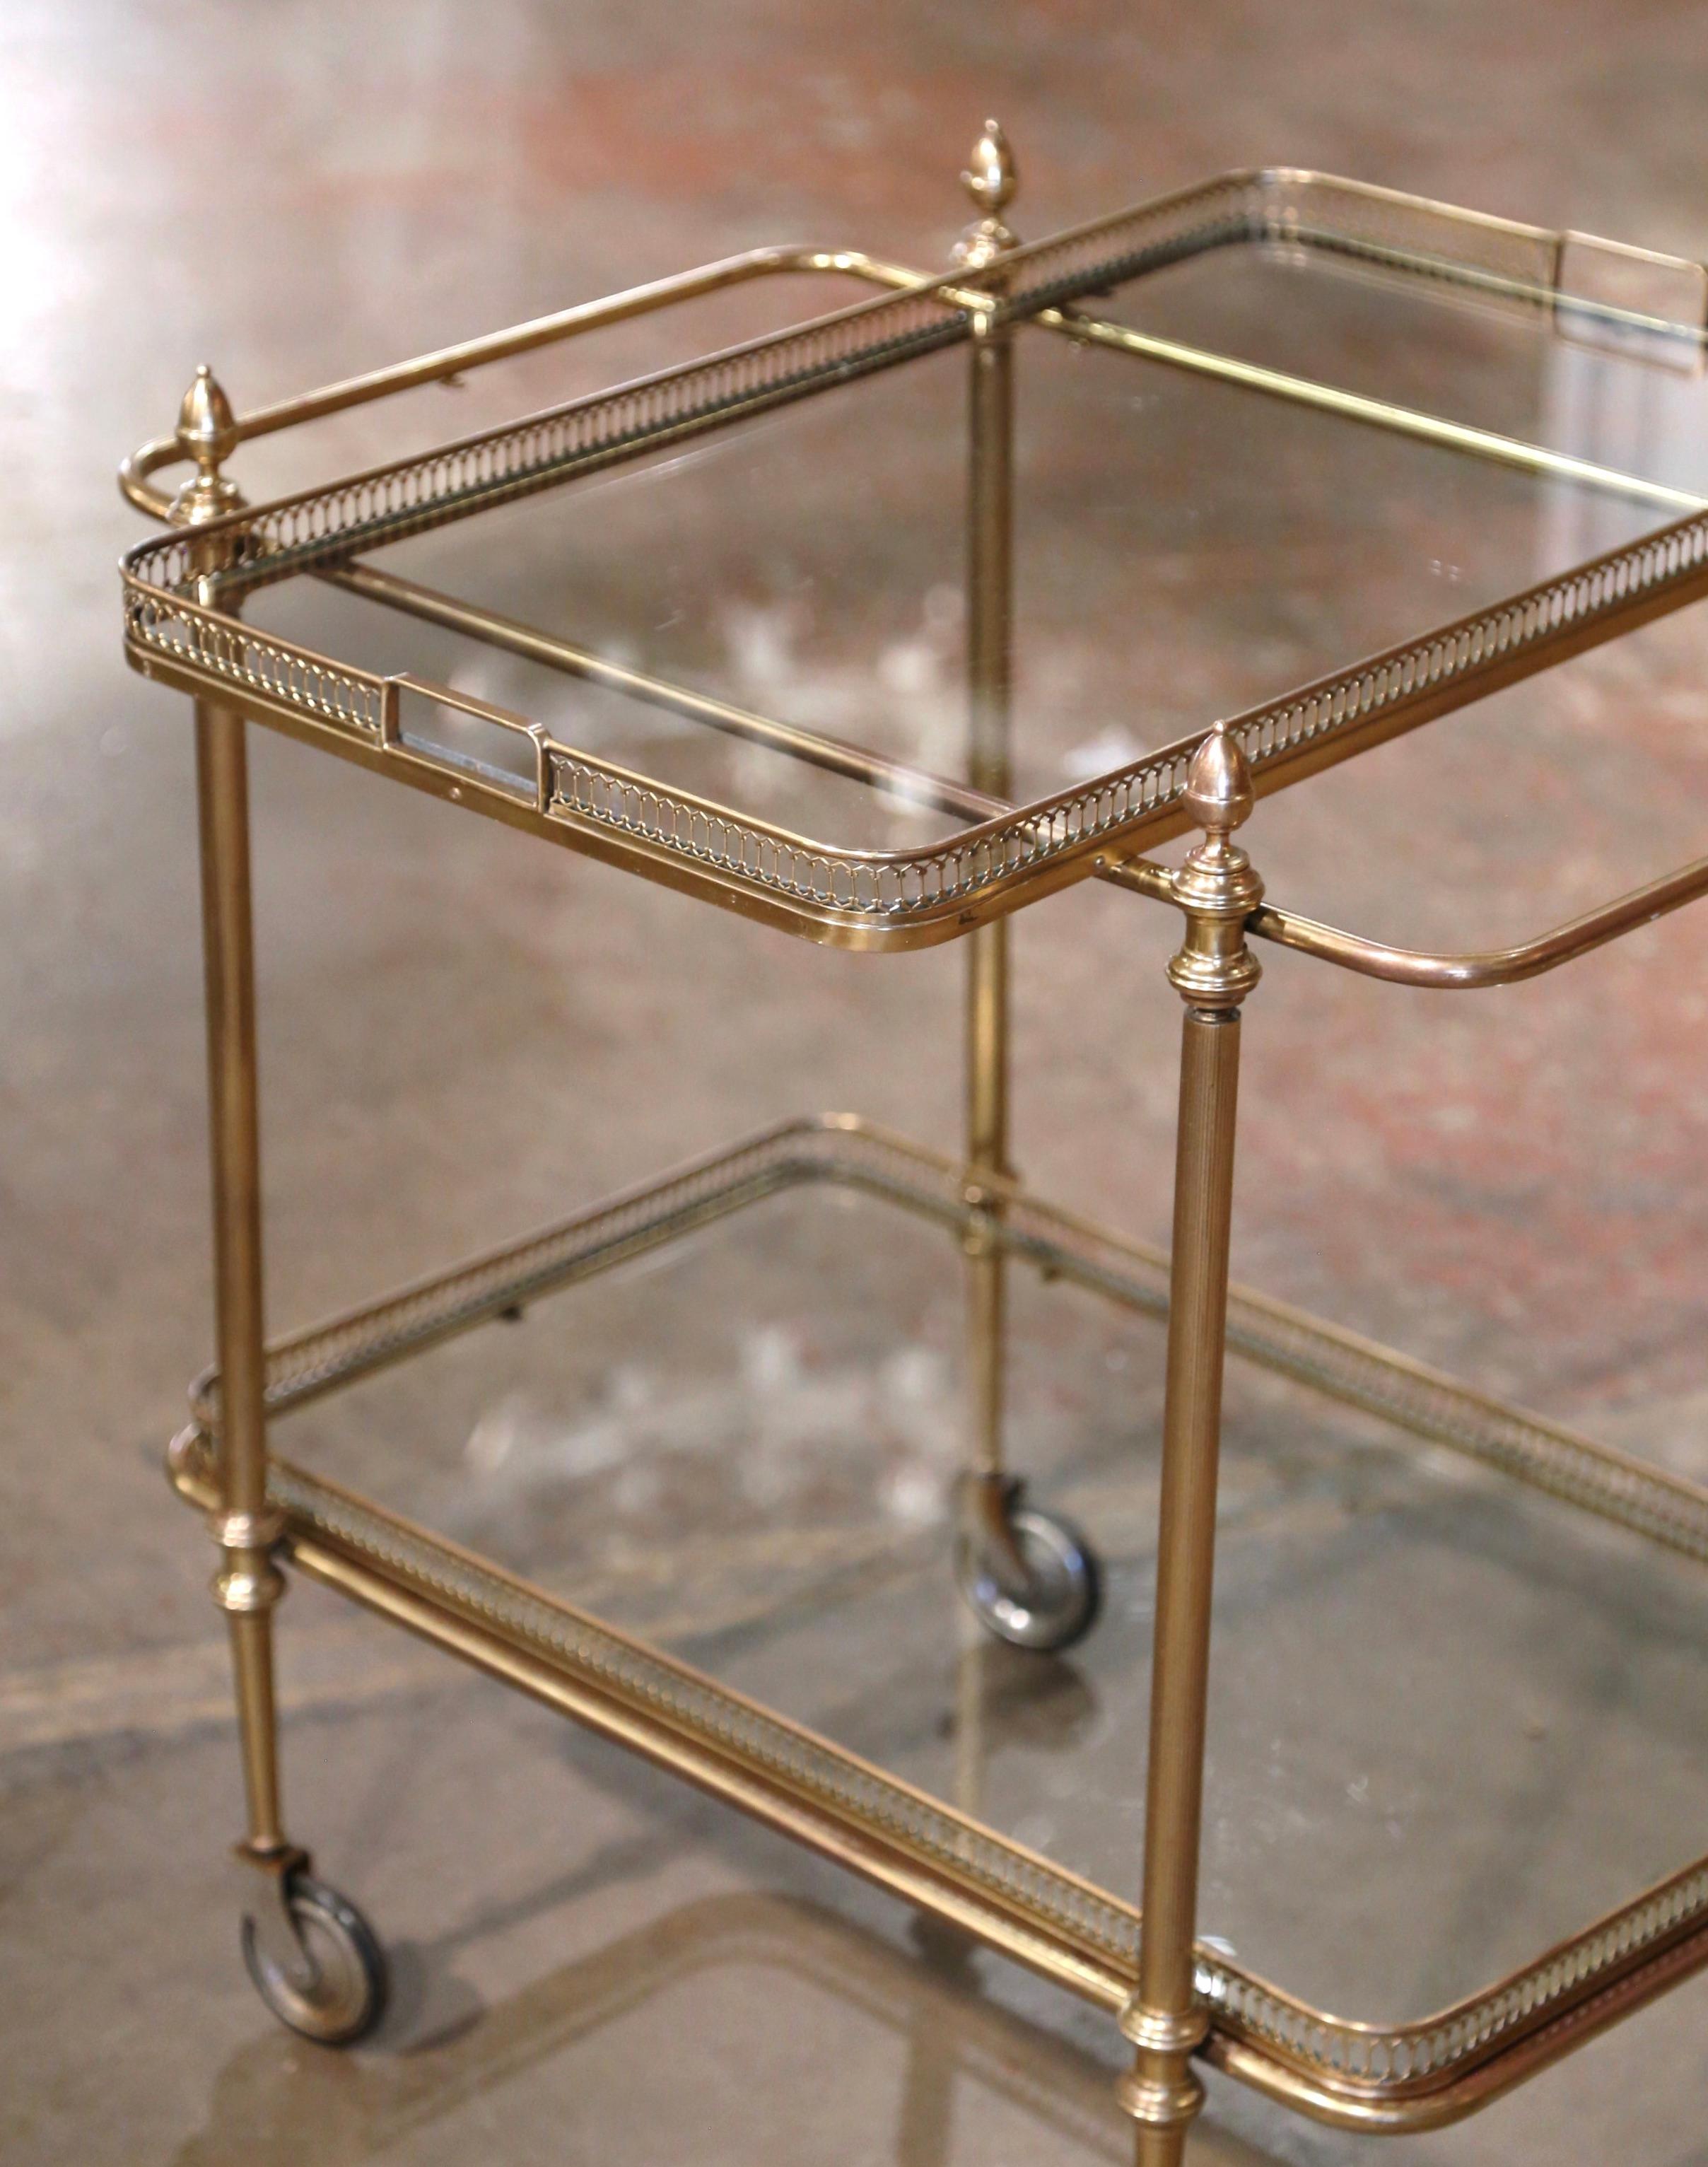 Hand-Crafted Early 20th Century French Gilt Brass Two-Tier Service Trolley Bar Cart on Wheels